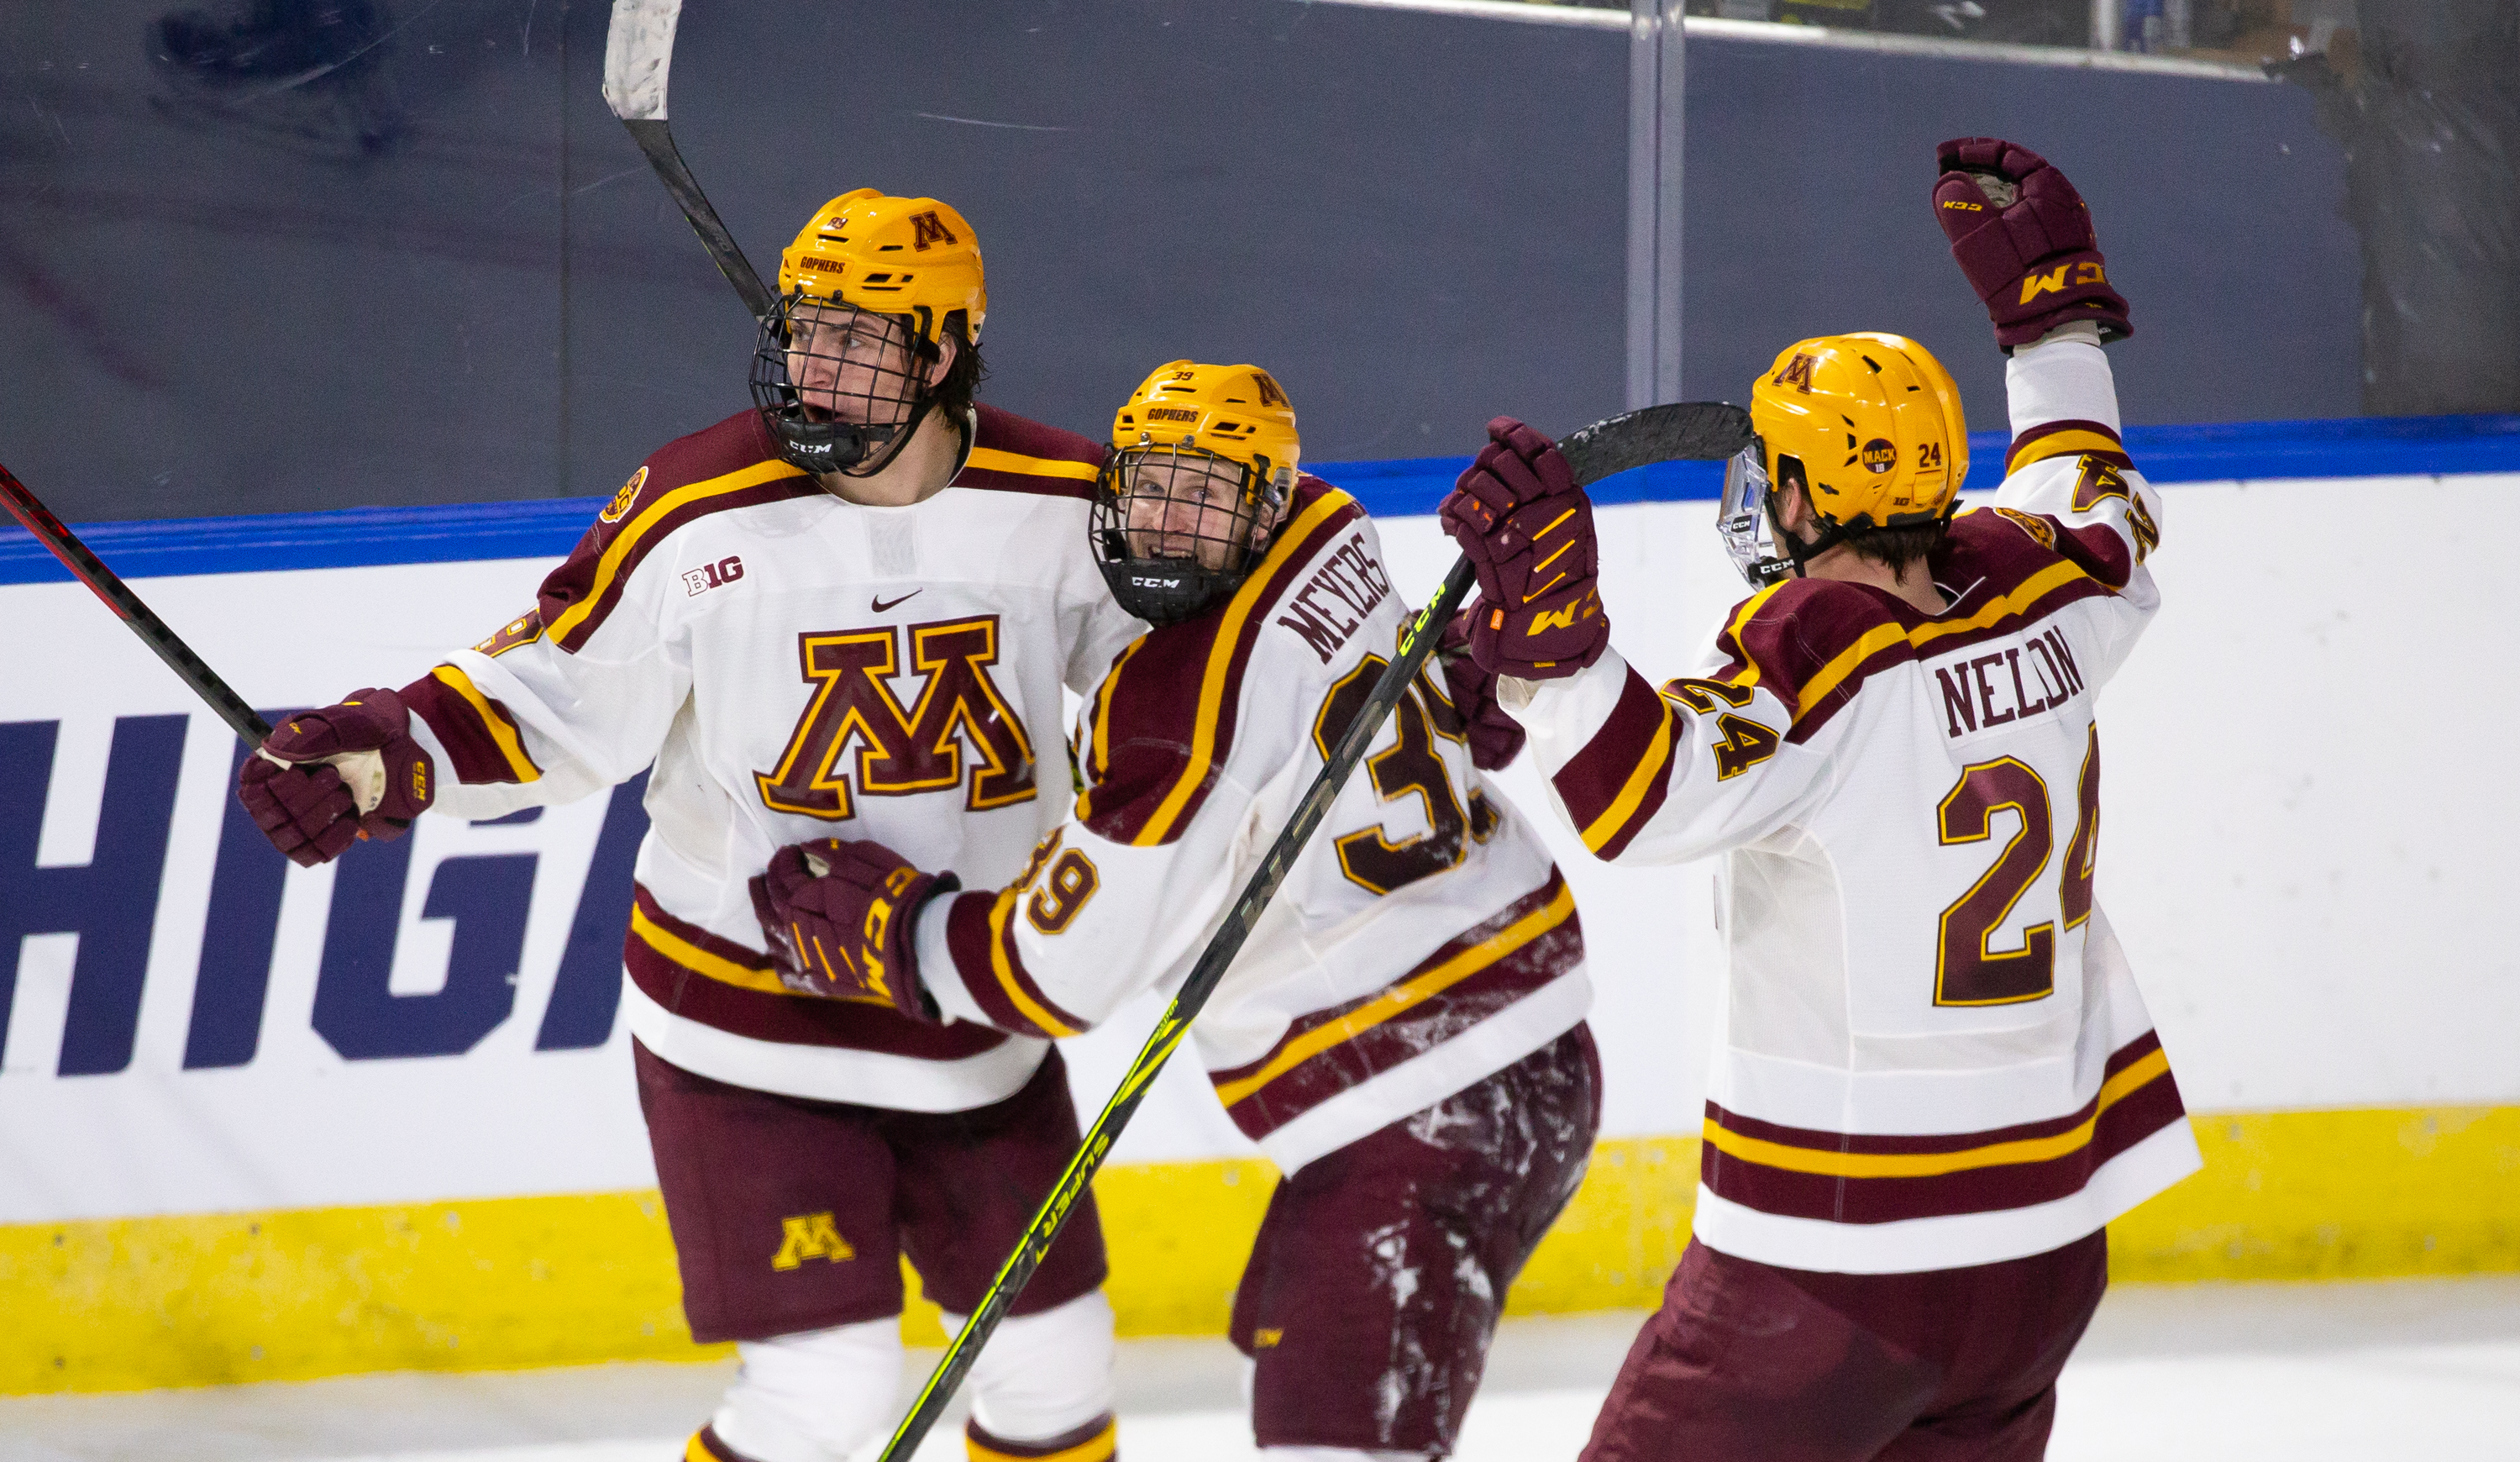 Matthew Knies #89 of the Minnesota Golden Gophers celebrates his goal against the Massachusetts Minutemen with teammates Ben Meyers #39 and Jaxon Nelson #24 during the NCAA Men’s Ice Hockey Northeast Regional game at the DCU Center on March 25, 2022 in Worcester, Massachusetts. The Golden Gophers won 4-3 in overtime.